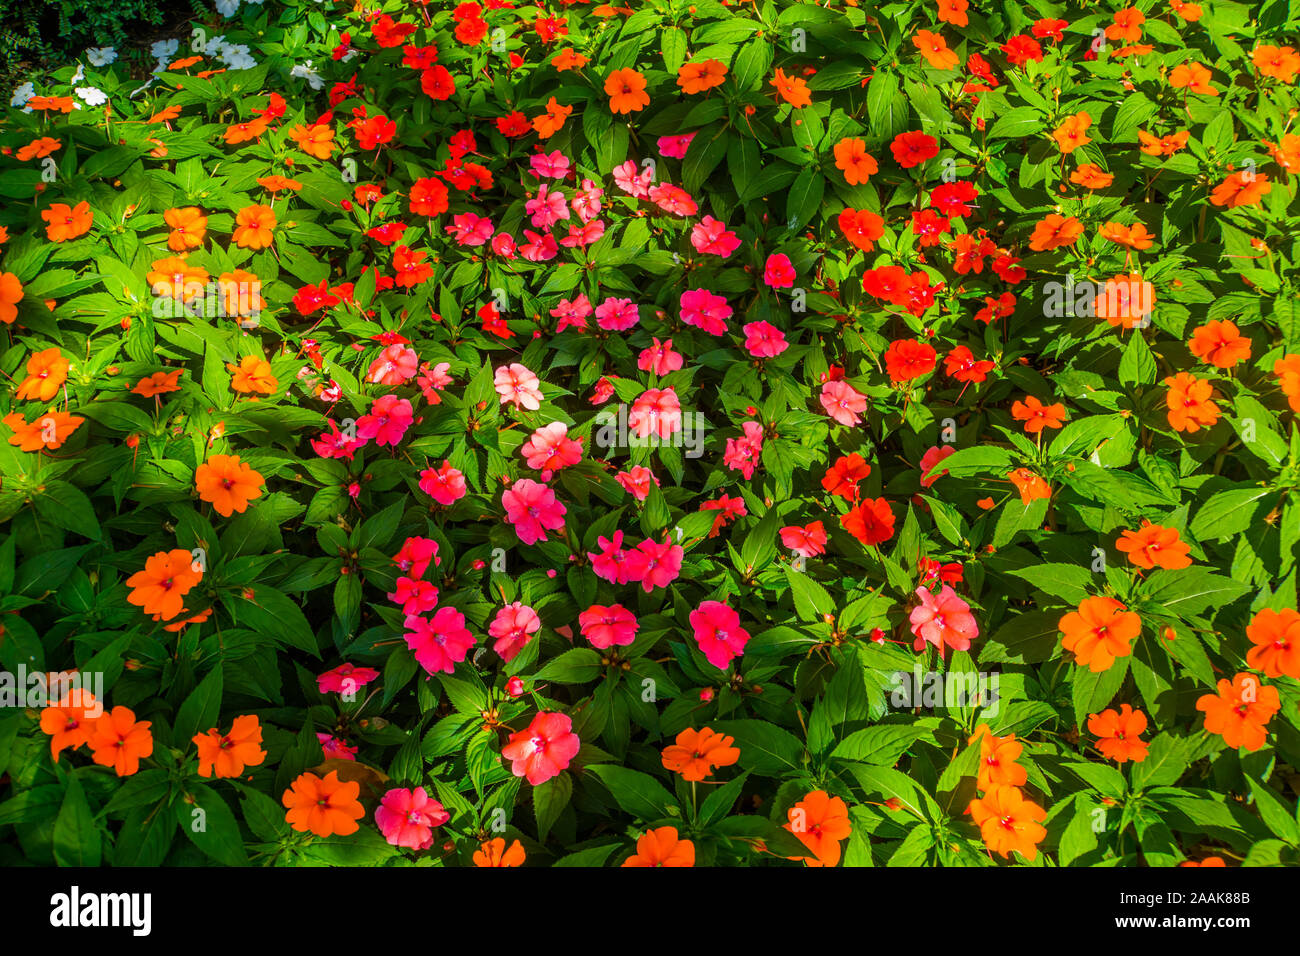 impatiens x hybrida hort, popular hybrid specie of jewelweed flowers, air purifying plant Stock Photo